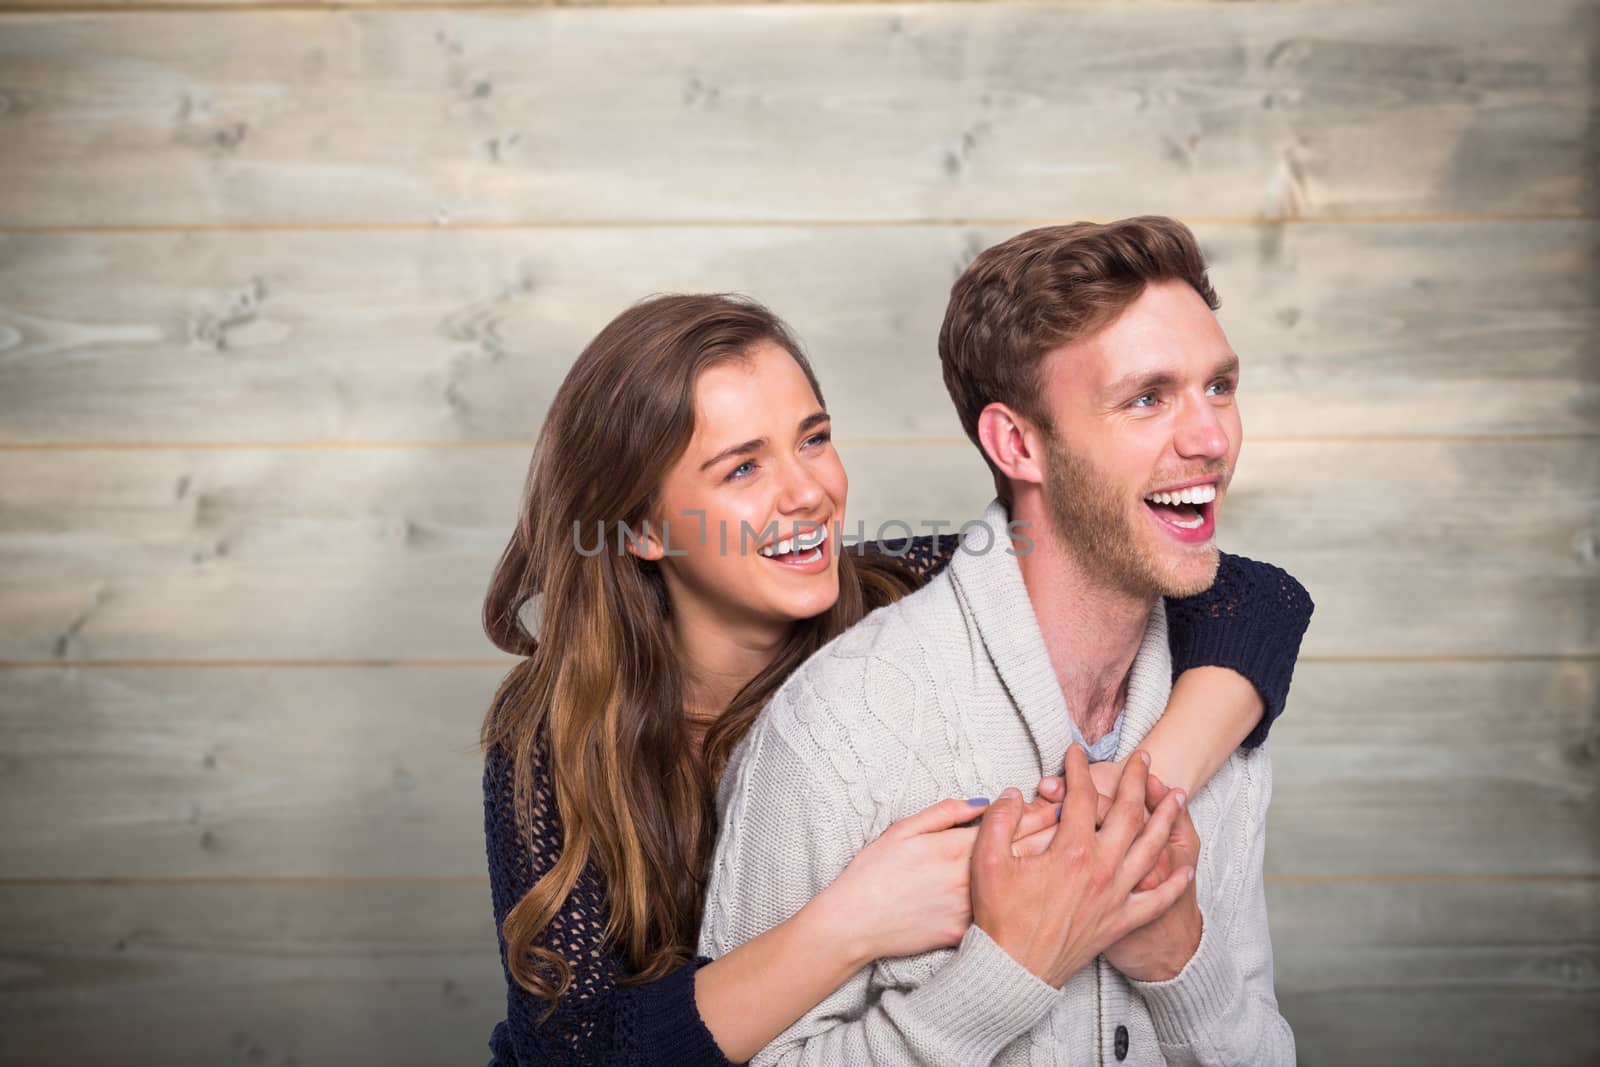 Composite image of cheerful young couple embracing by Wavebreakmedia